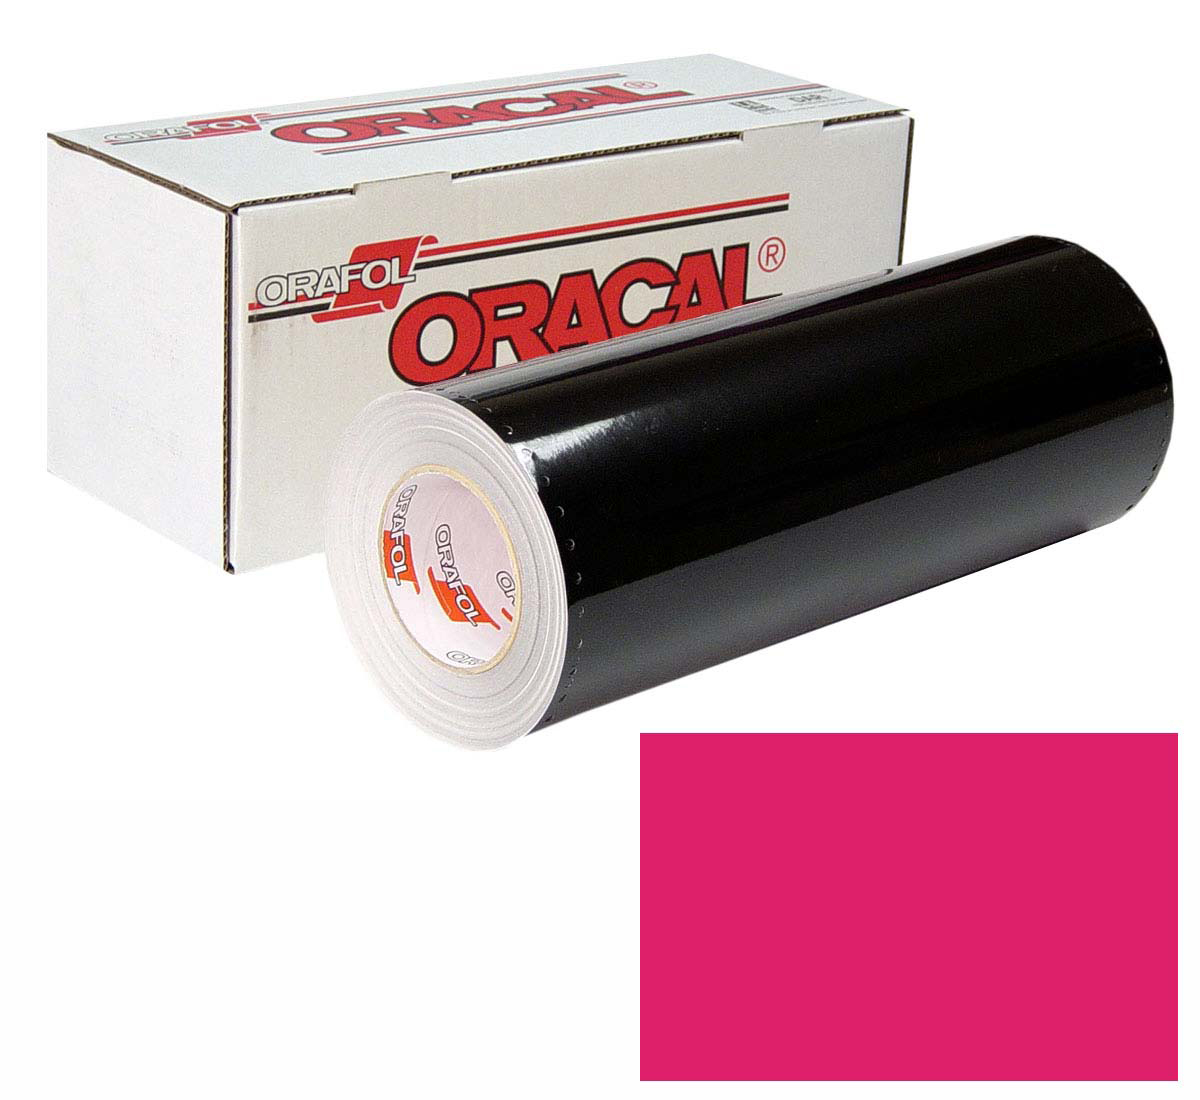 ORACAL 641 30in X 50yd 041 Pink